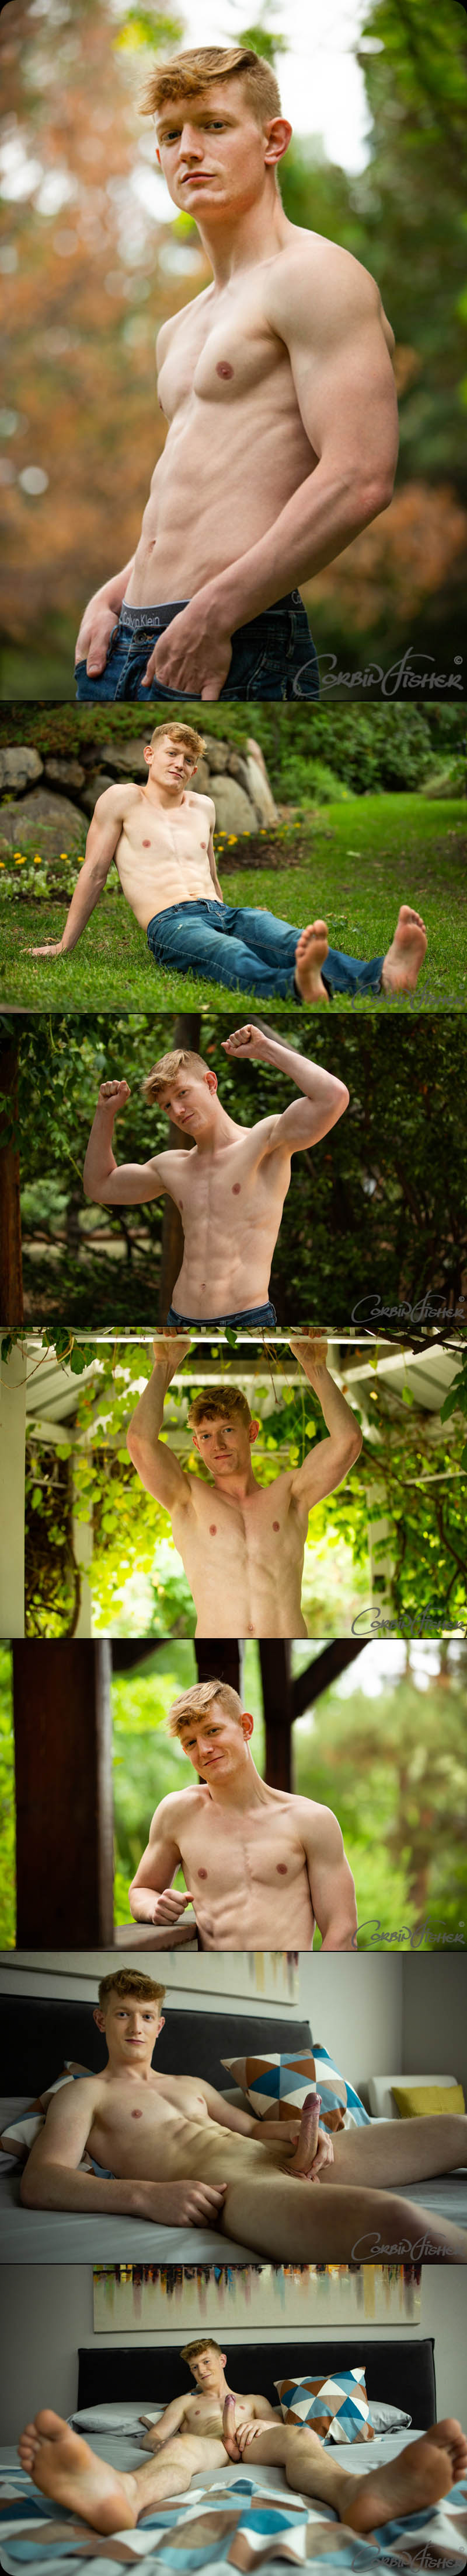 Adam's Introductory Solo at CorbinFisher